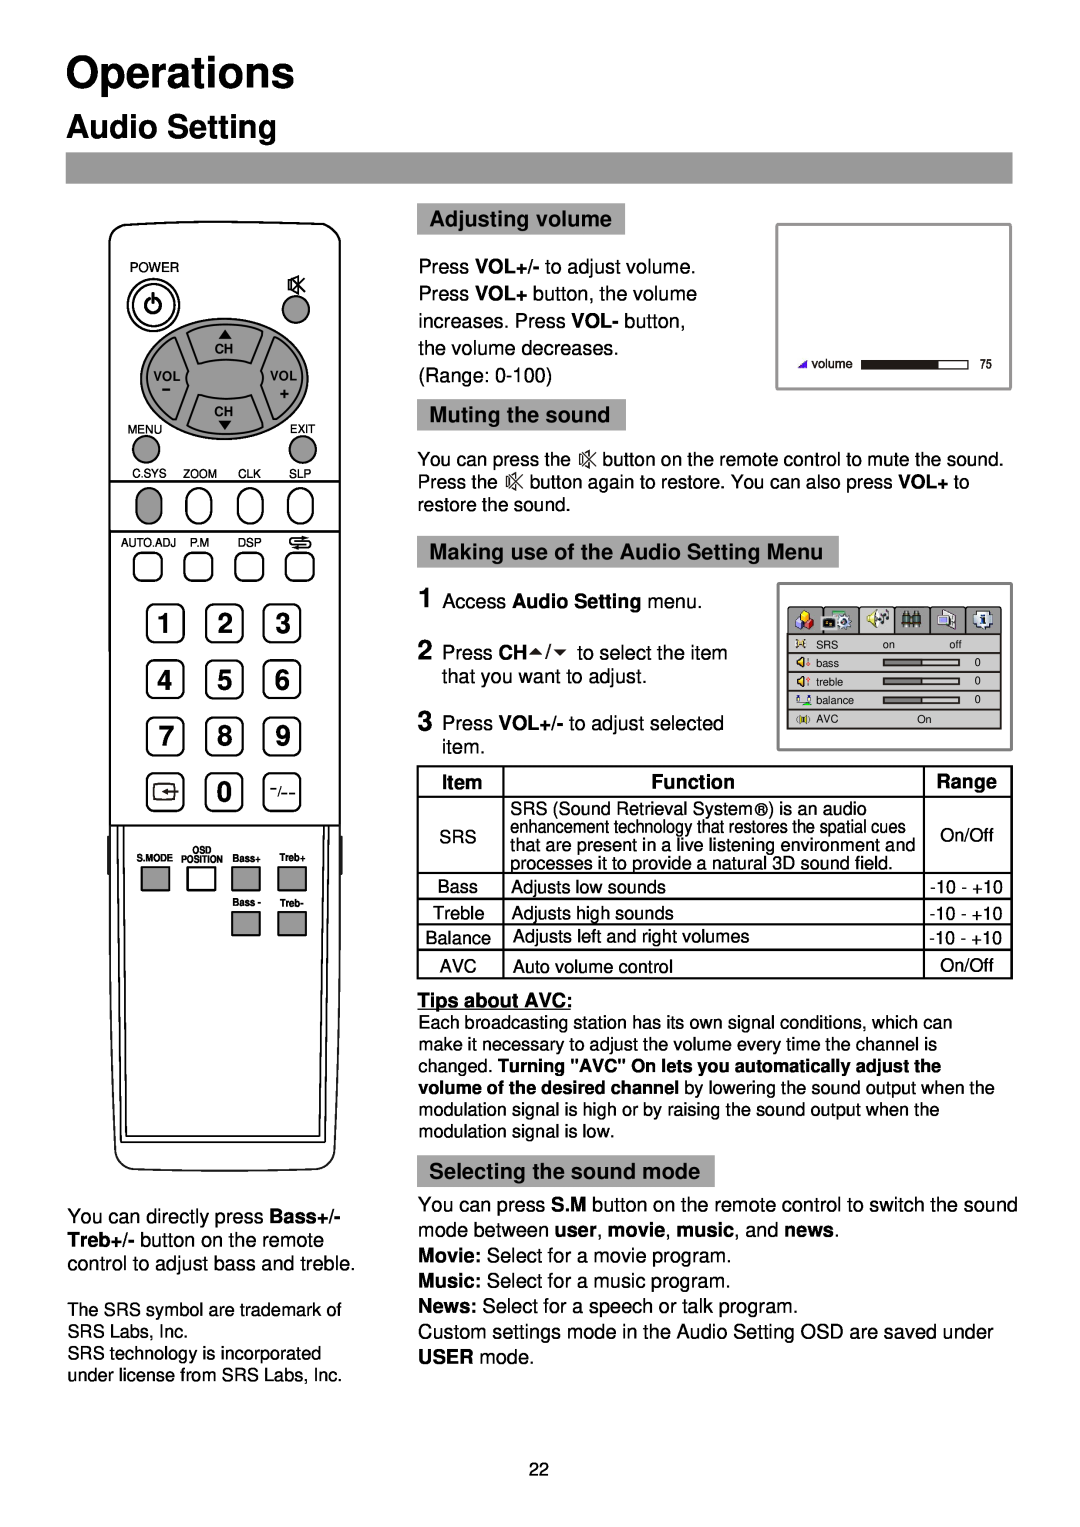 Palsonic TFTV435WS Audio Setting, Operations, 1 2 4 5 7 8, Adjusting volume, Muting the sound, Selecting the sound mode 